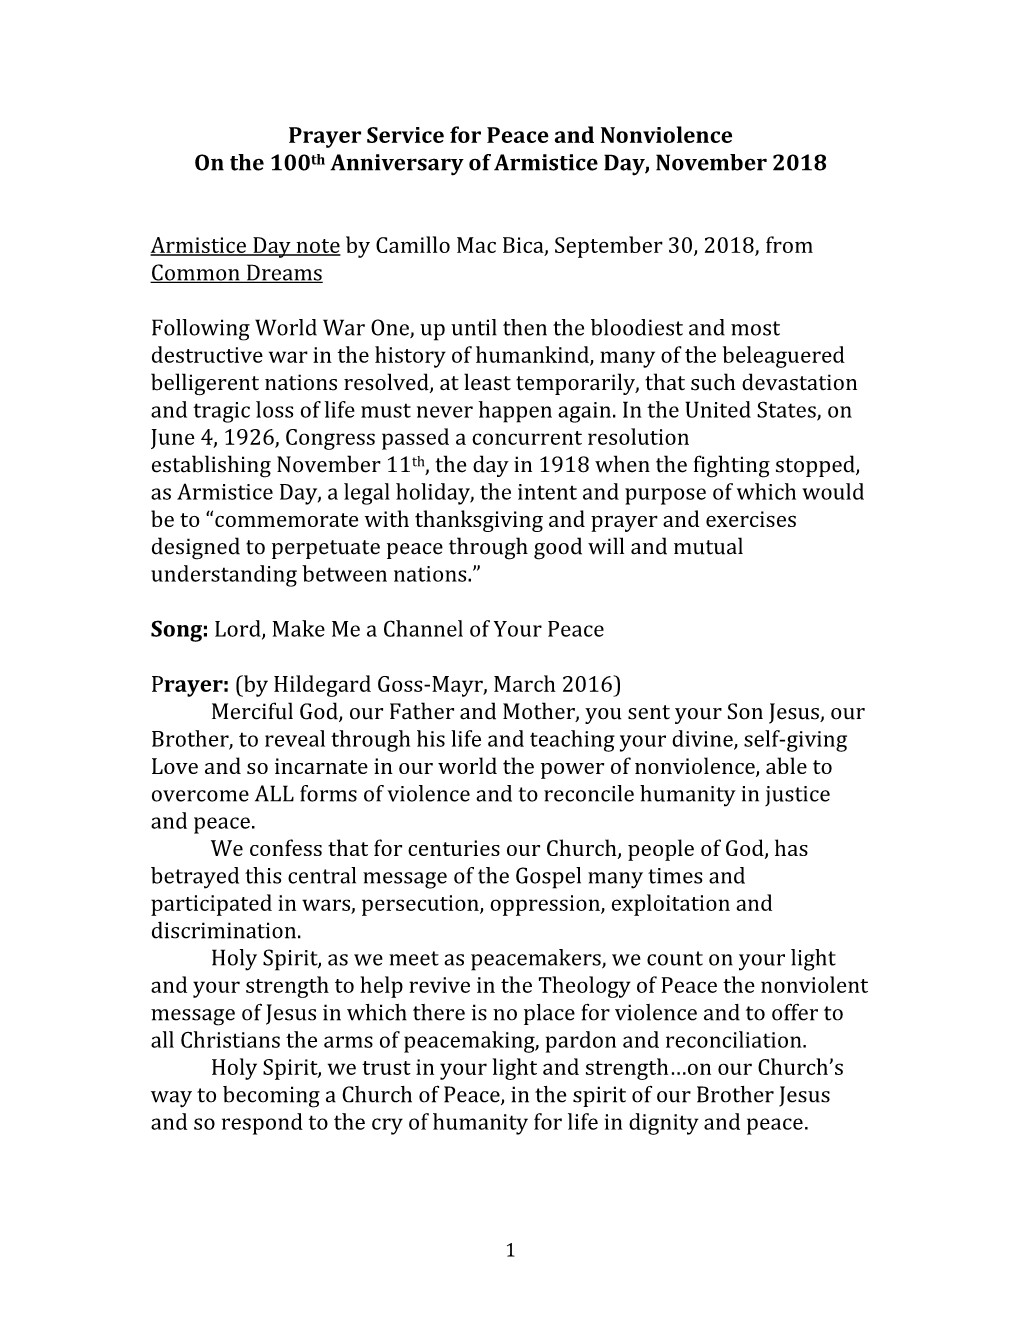 Prayer Service for Peace and Nonviolence on the 100Th Anniversary of Armistice Day, November 2018